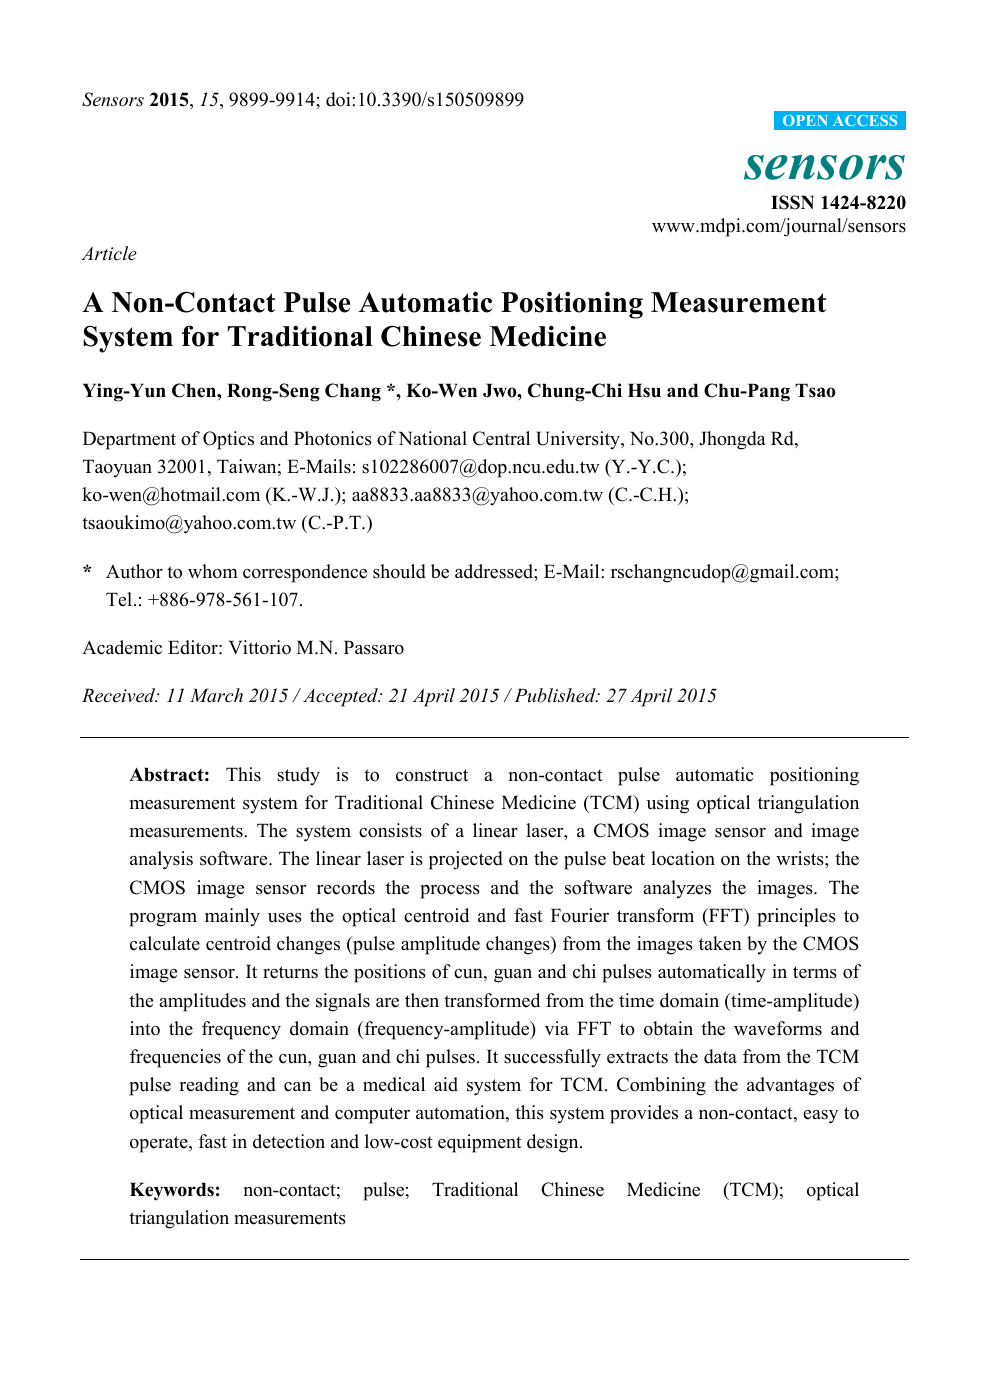 A Non Contact Pulse Automatic Positioning Measurement System For Traditional Chinese Medicine Topic Of Research Paper In Medical Engineering Download Scholarly Article Pdf And Read For Free On Cyberleninka Open Science Hub